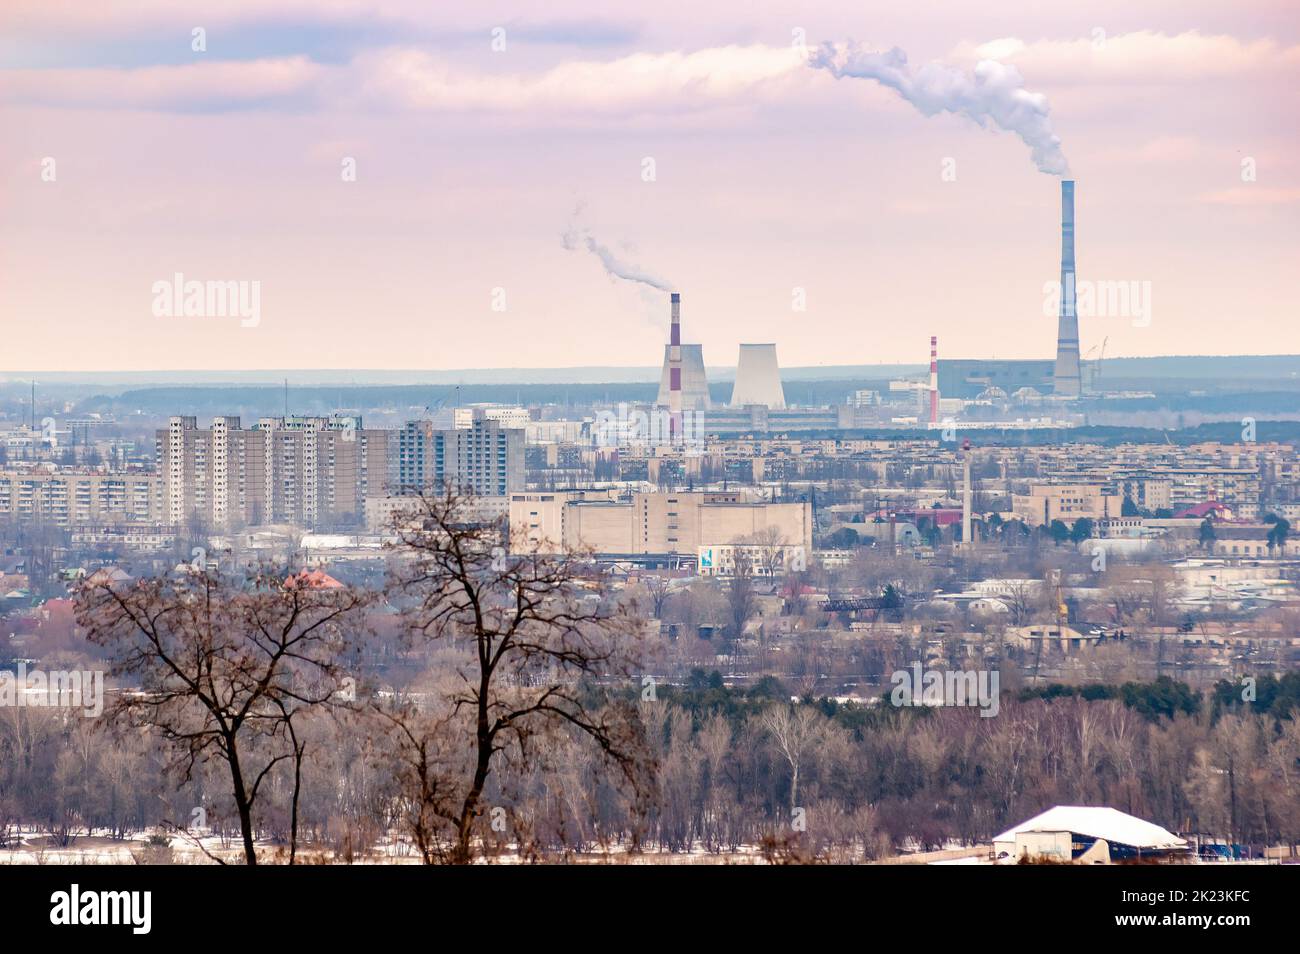 Panoramic view of the Kiev's left bank from the Park of Eternal Glory. Trees, buildings and factories with high smoking chimneys appear in the distanc Stock Photo